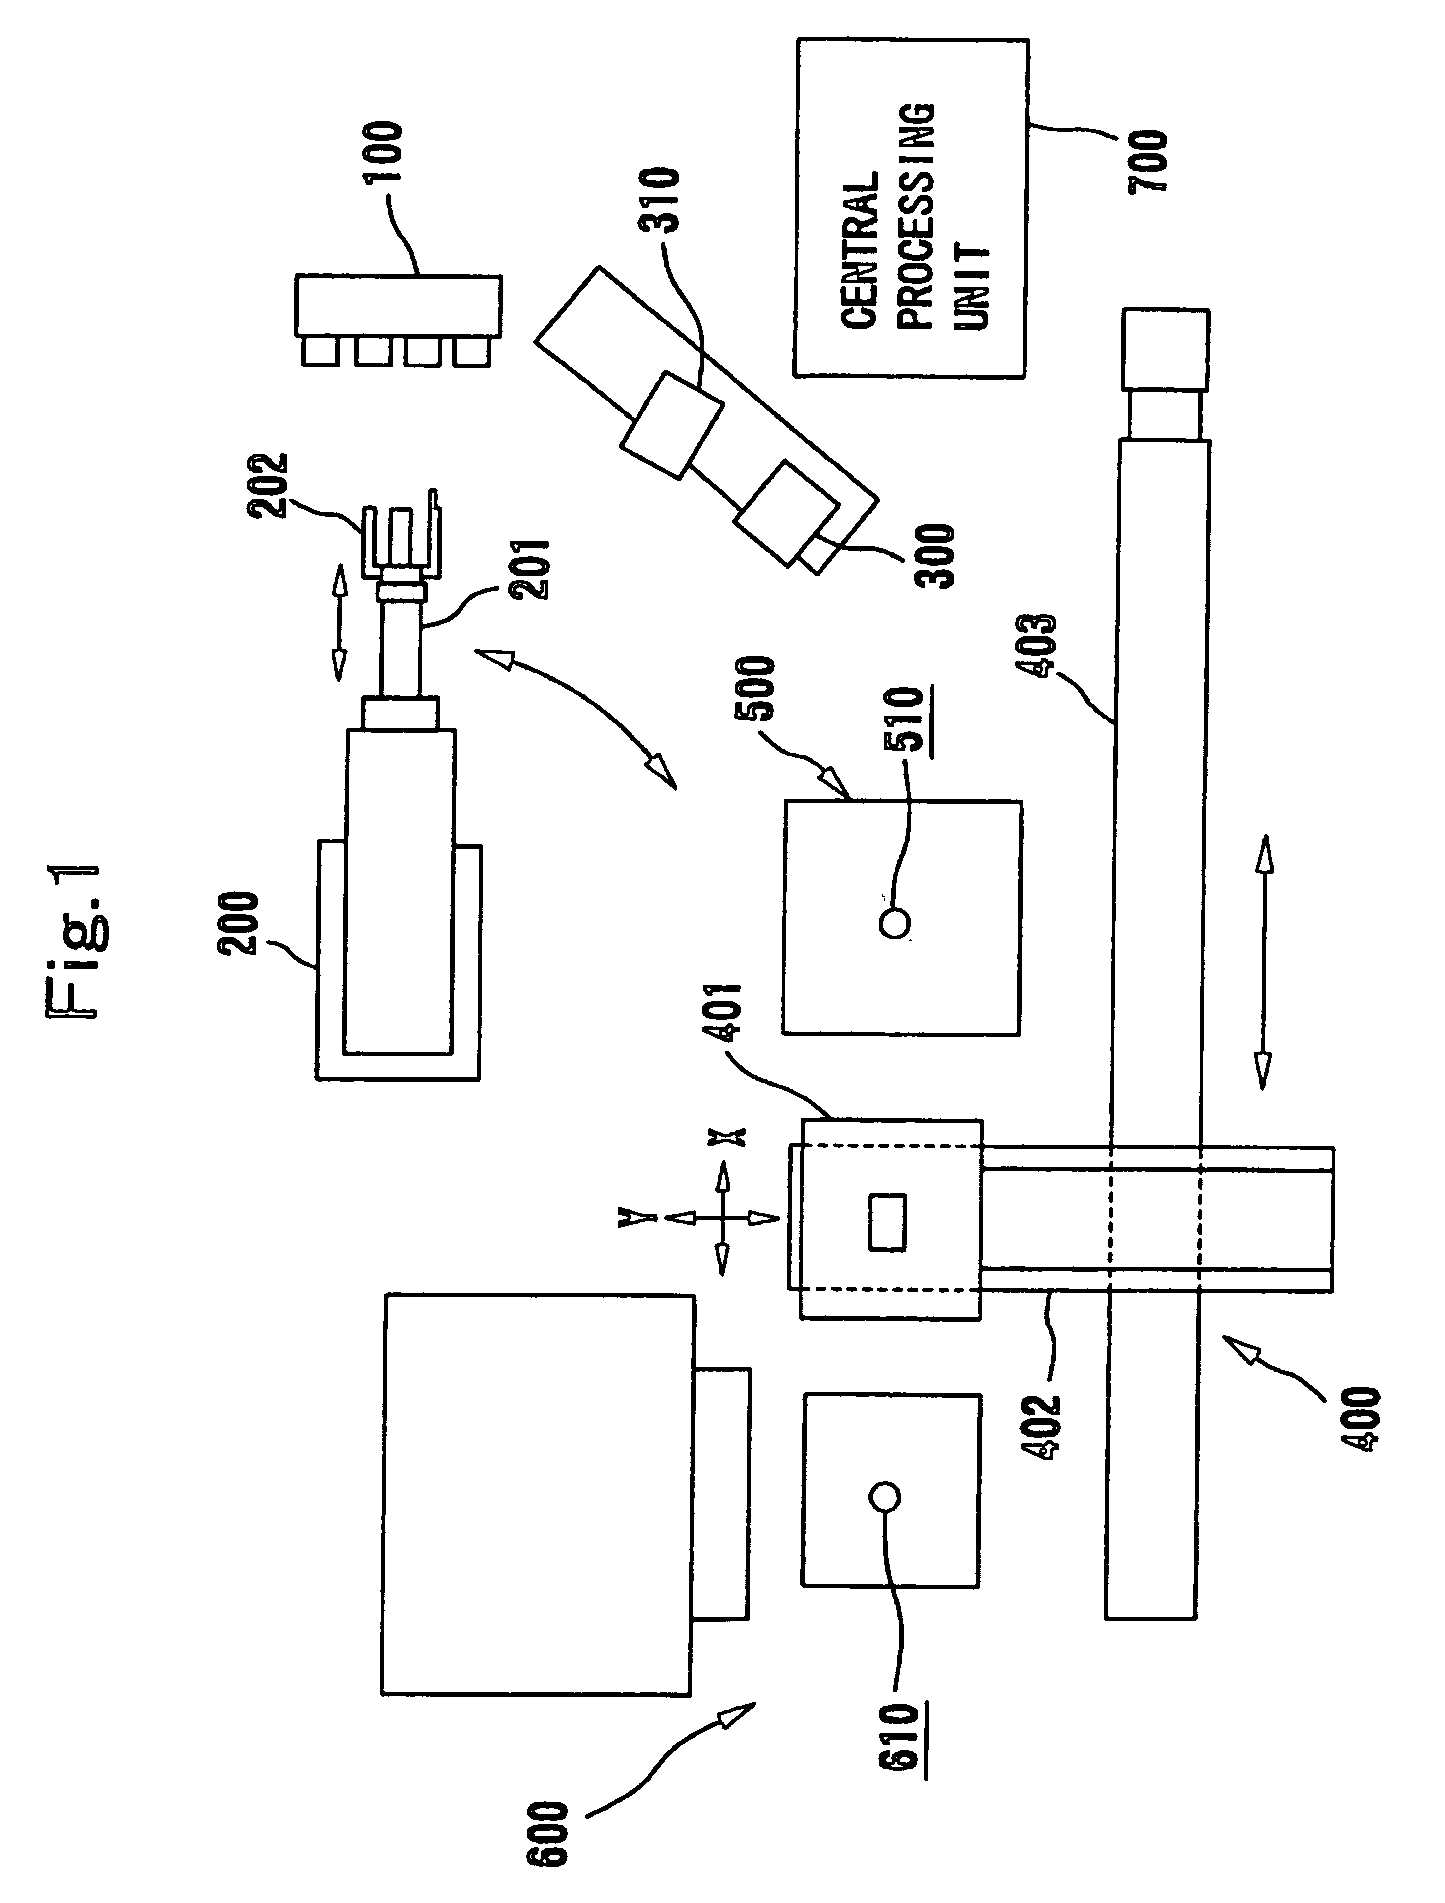 Apparatus for estimating specific polymer crystal